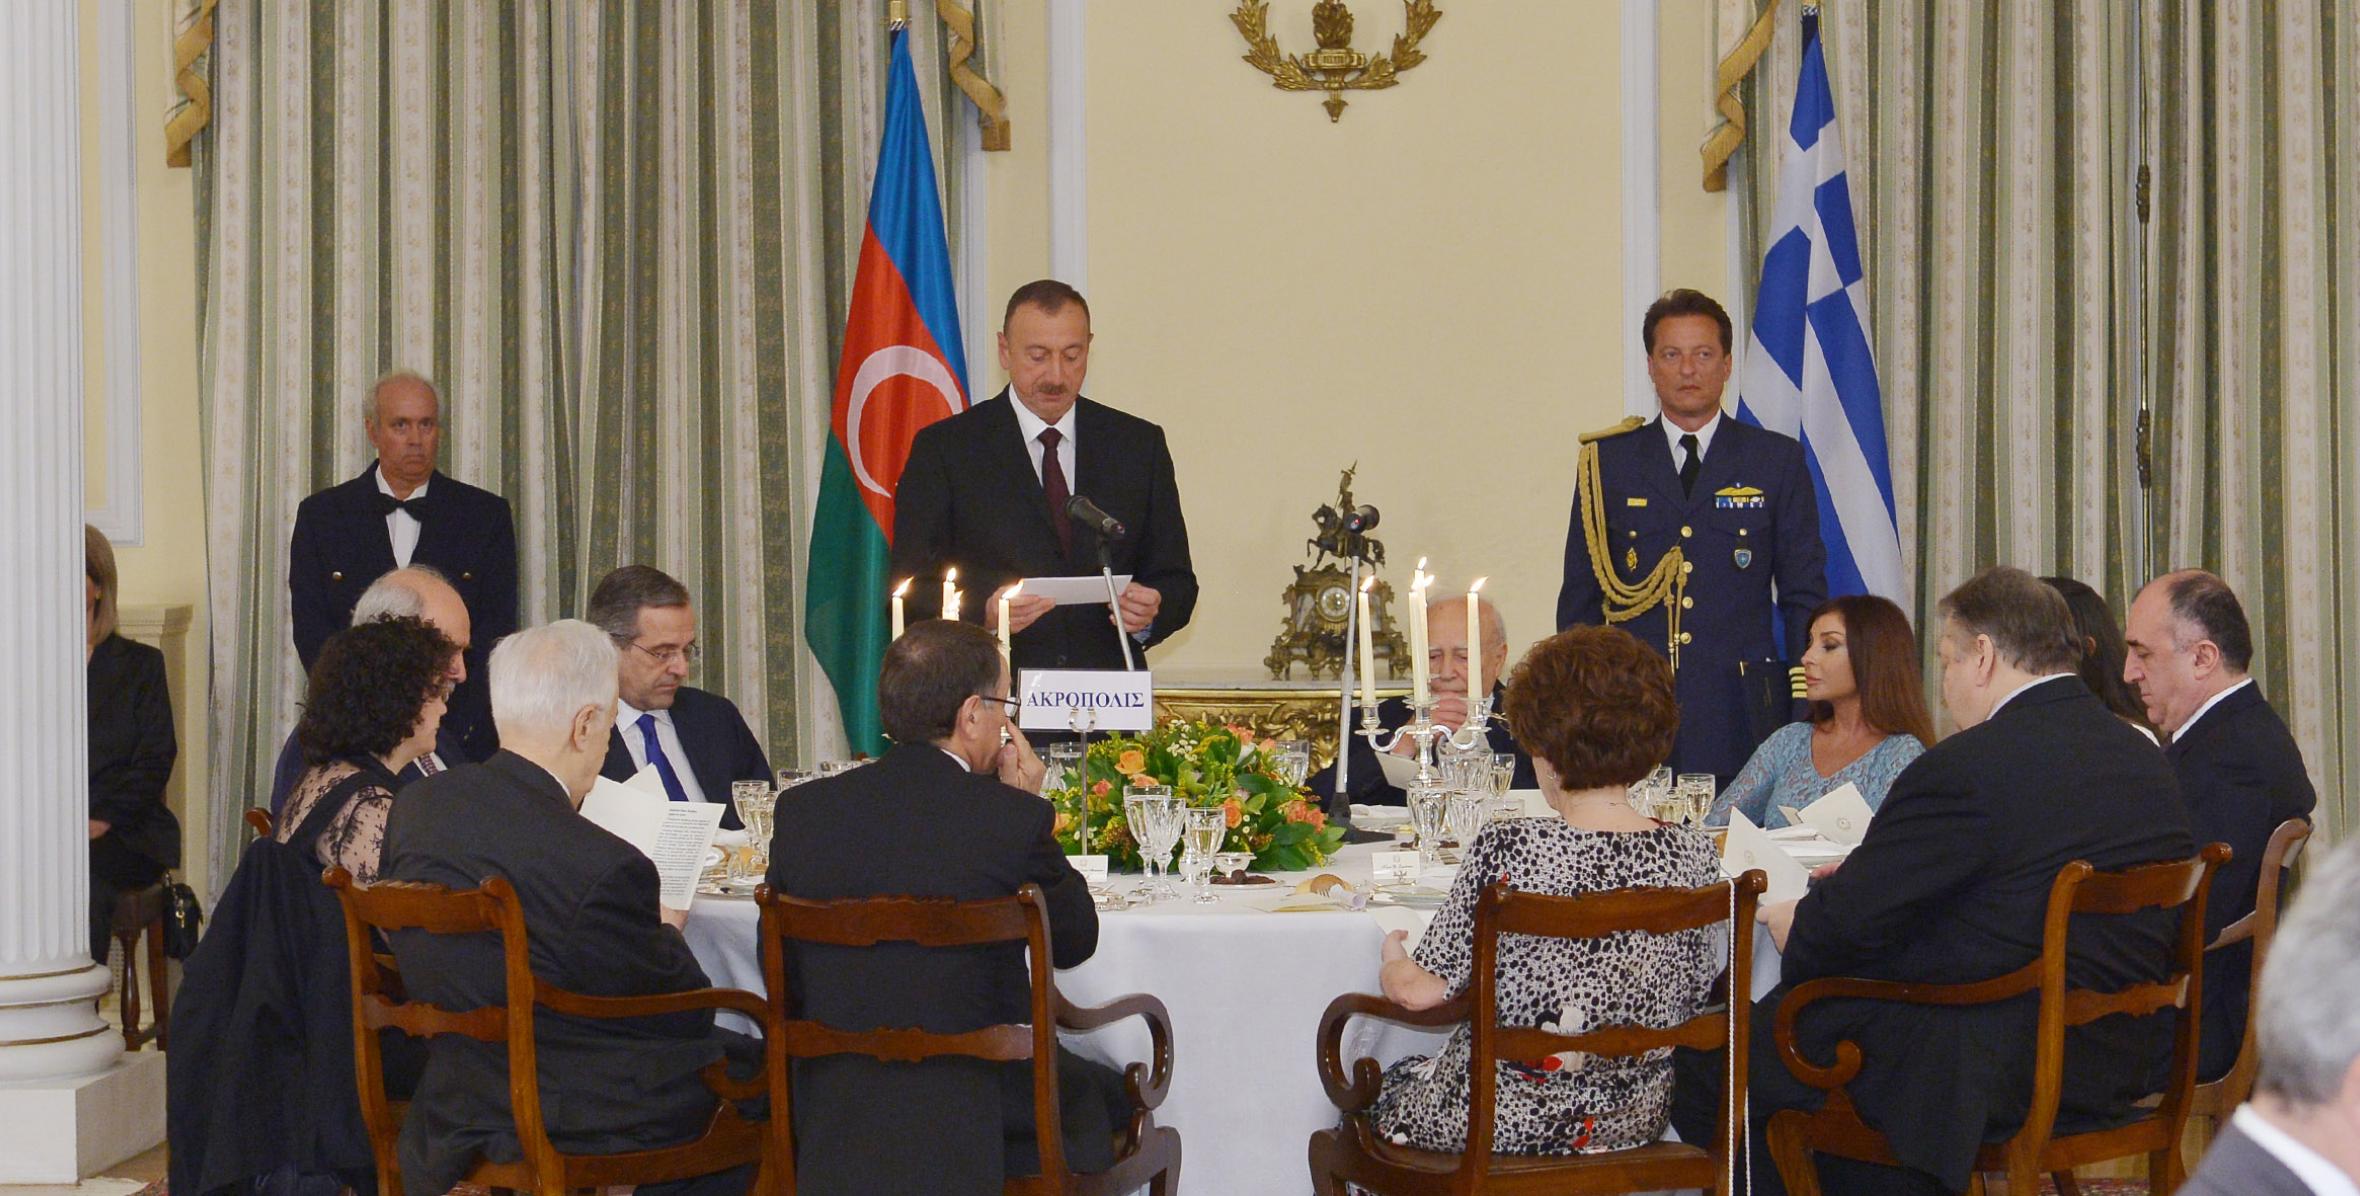 A state dinner was hosted in honor of Ilham Aliyev in Athens